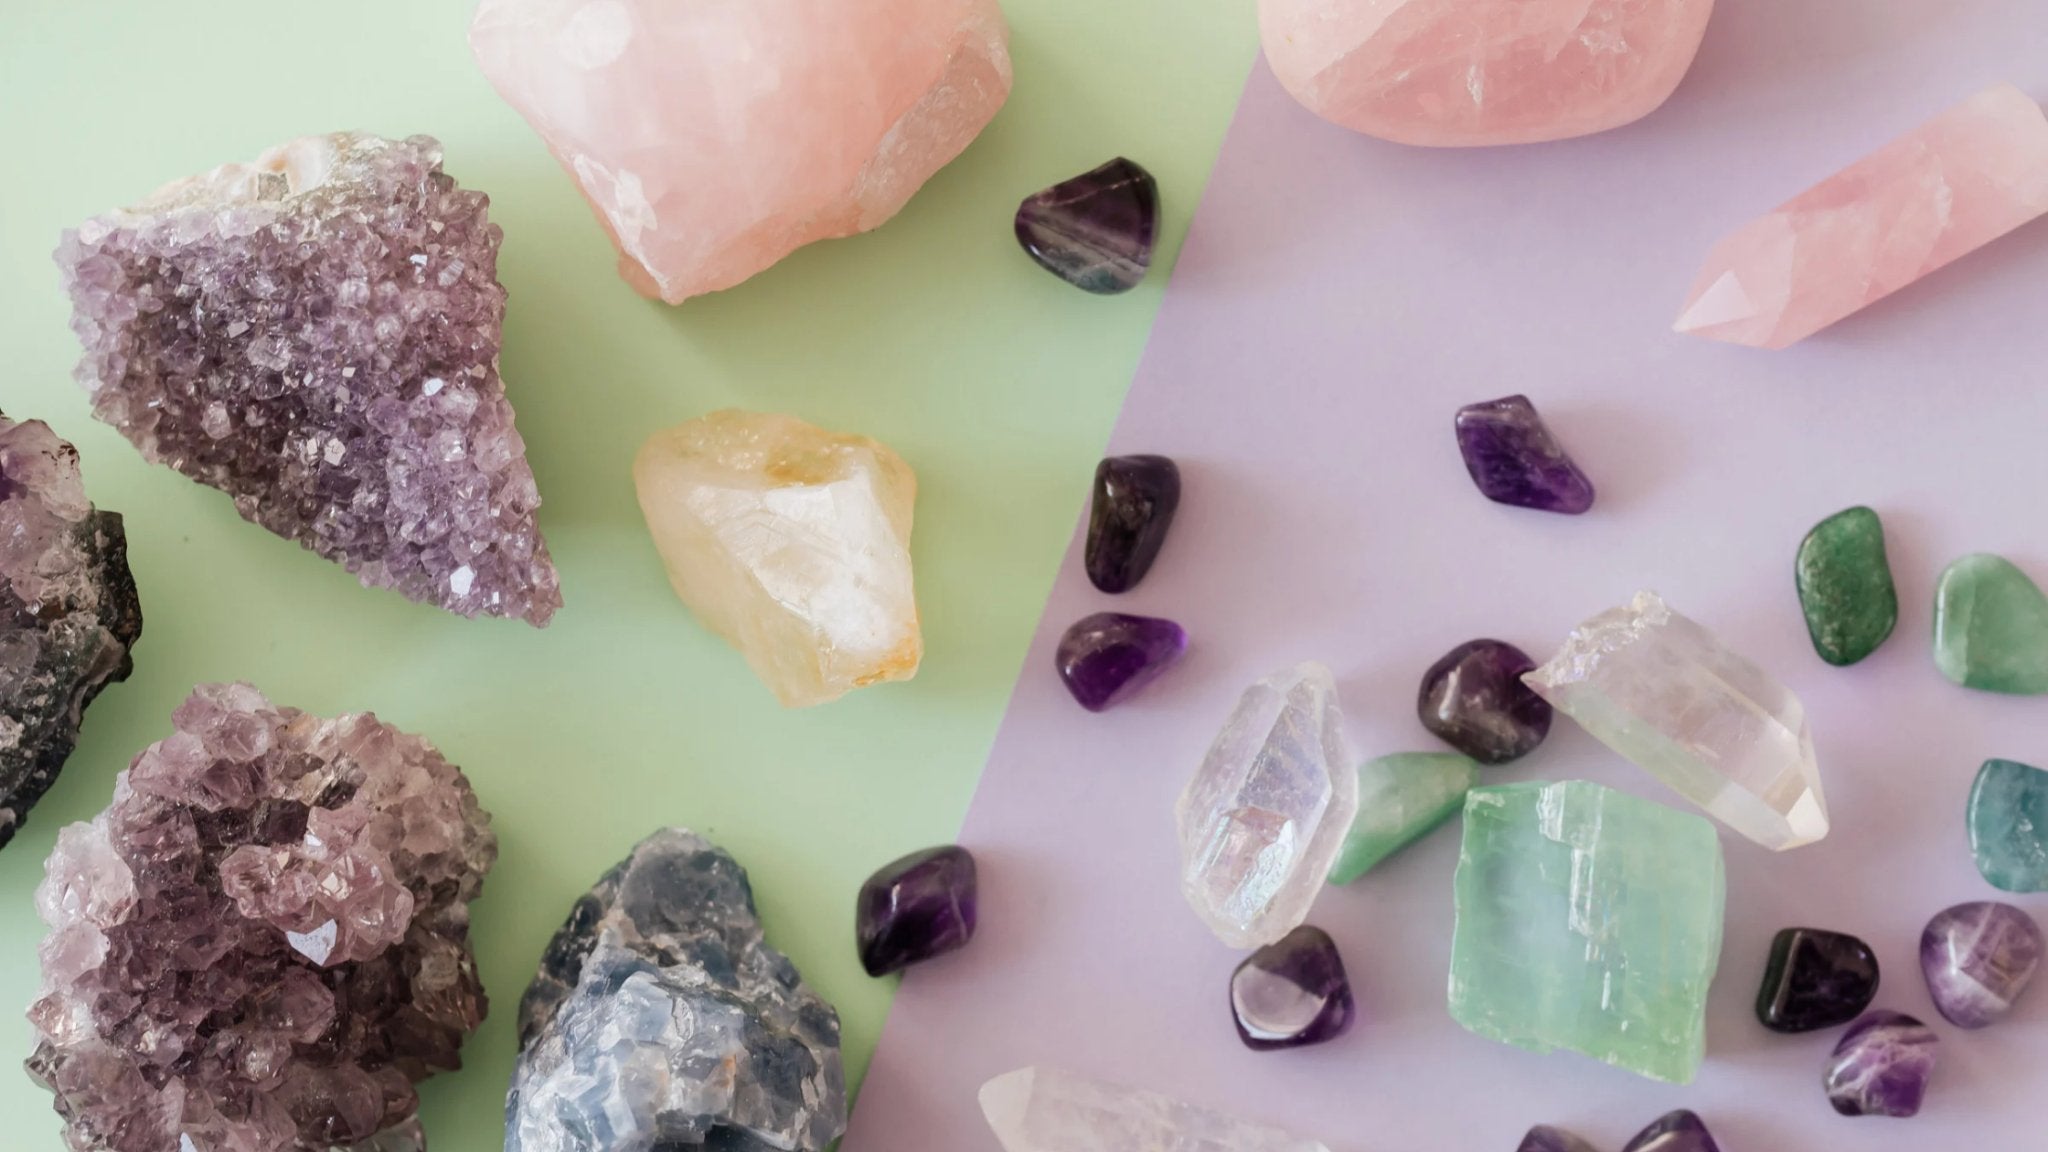 Crystal Healing - Wild Witchery Apothecary